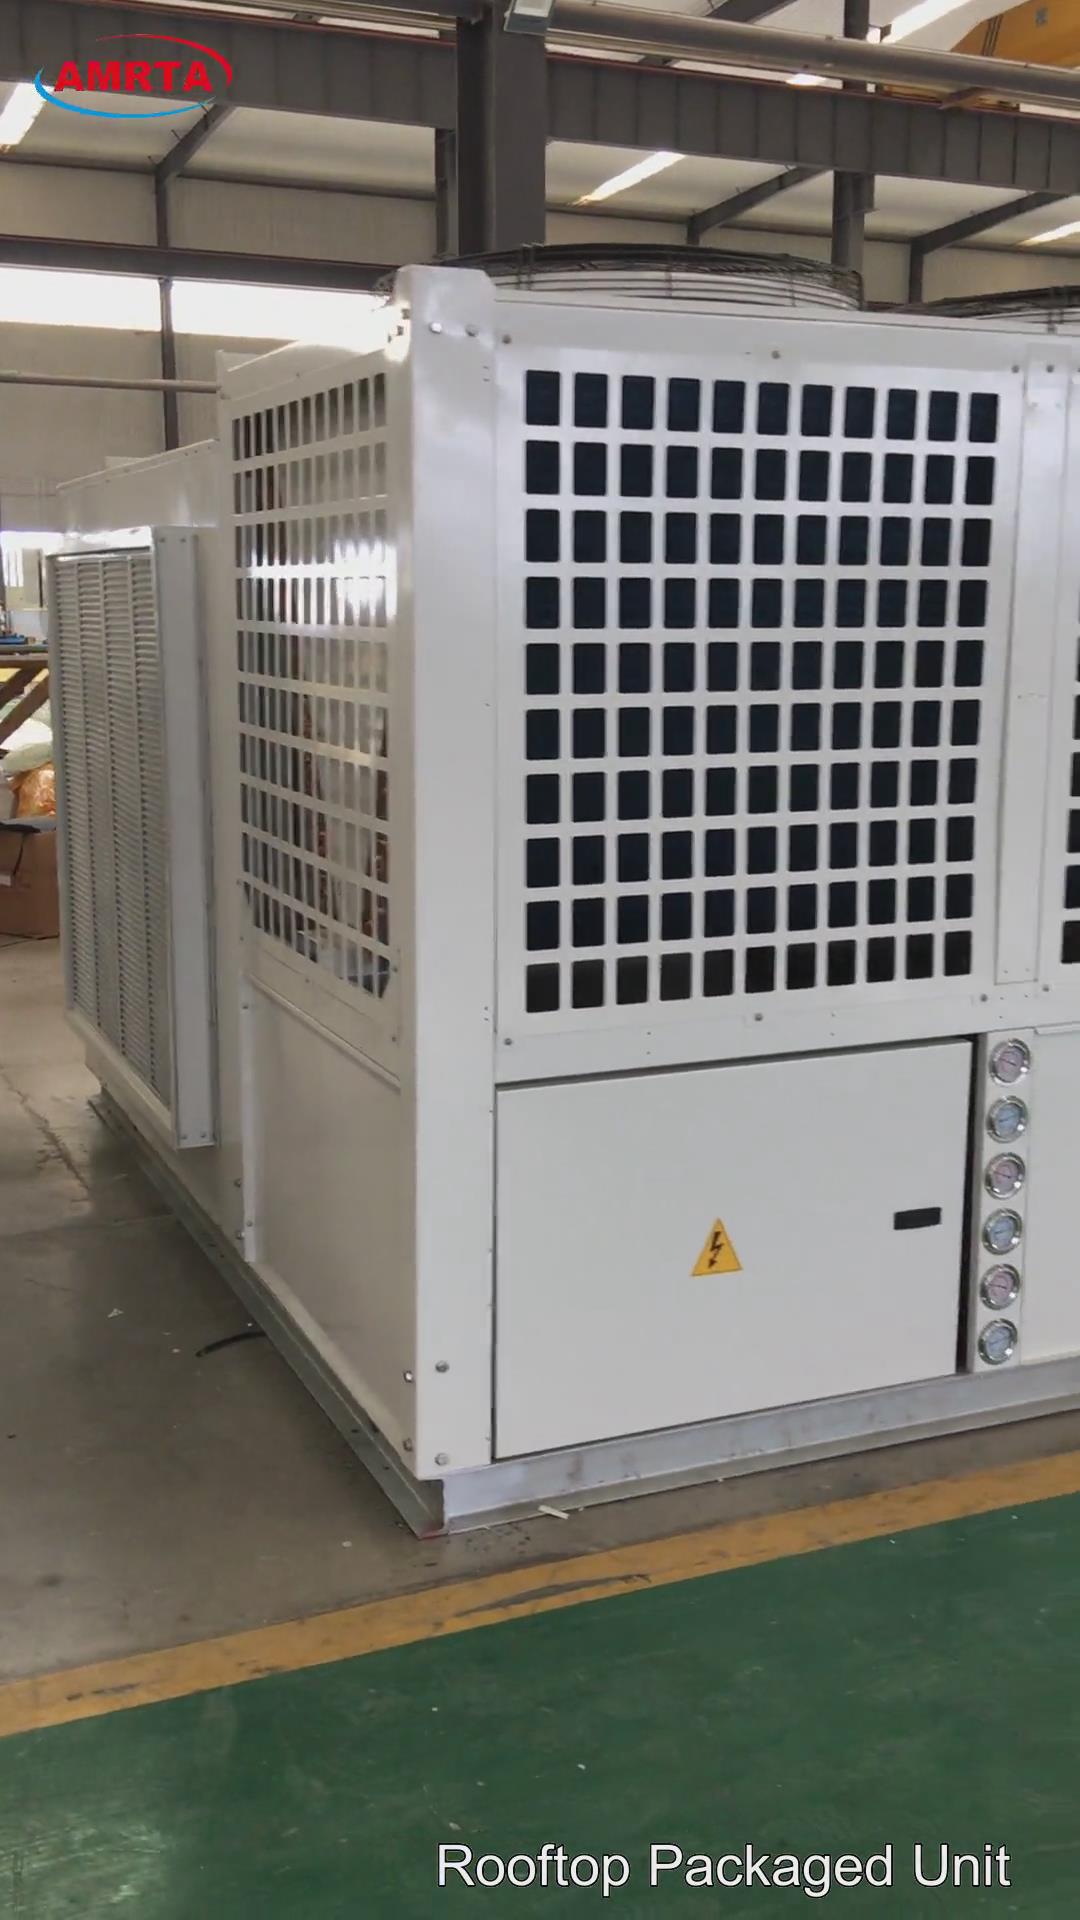 105kW Rooftop Packaged Unit